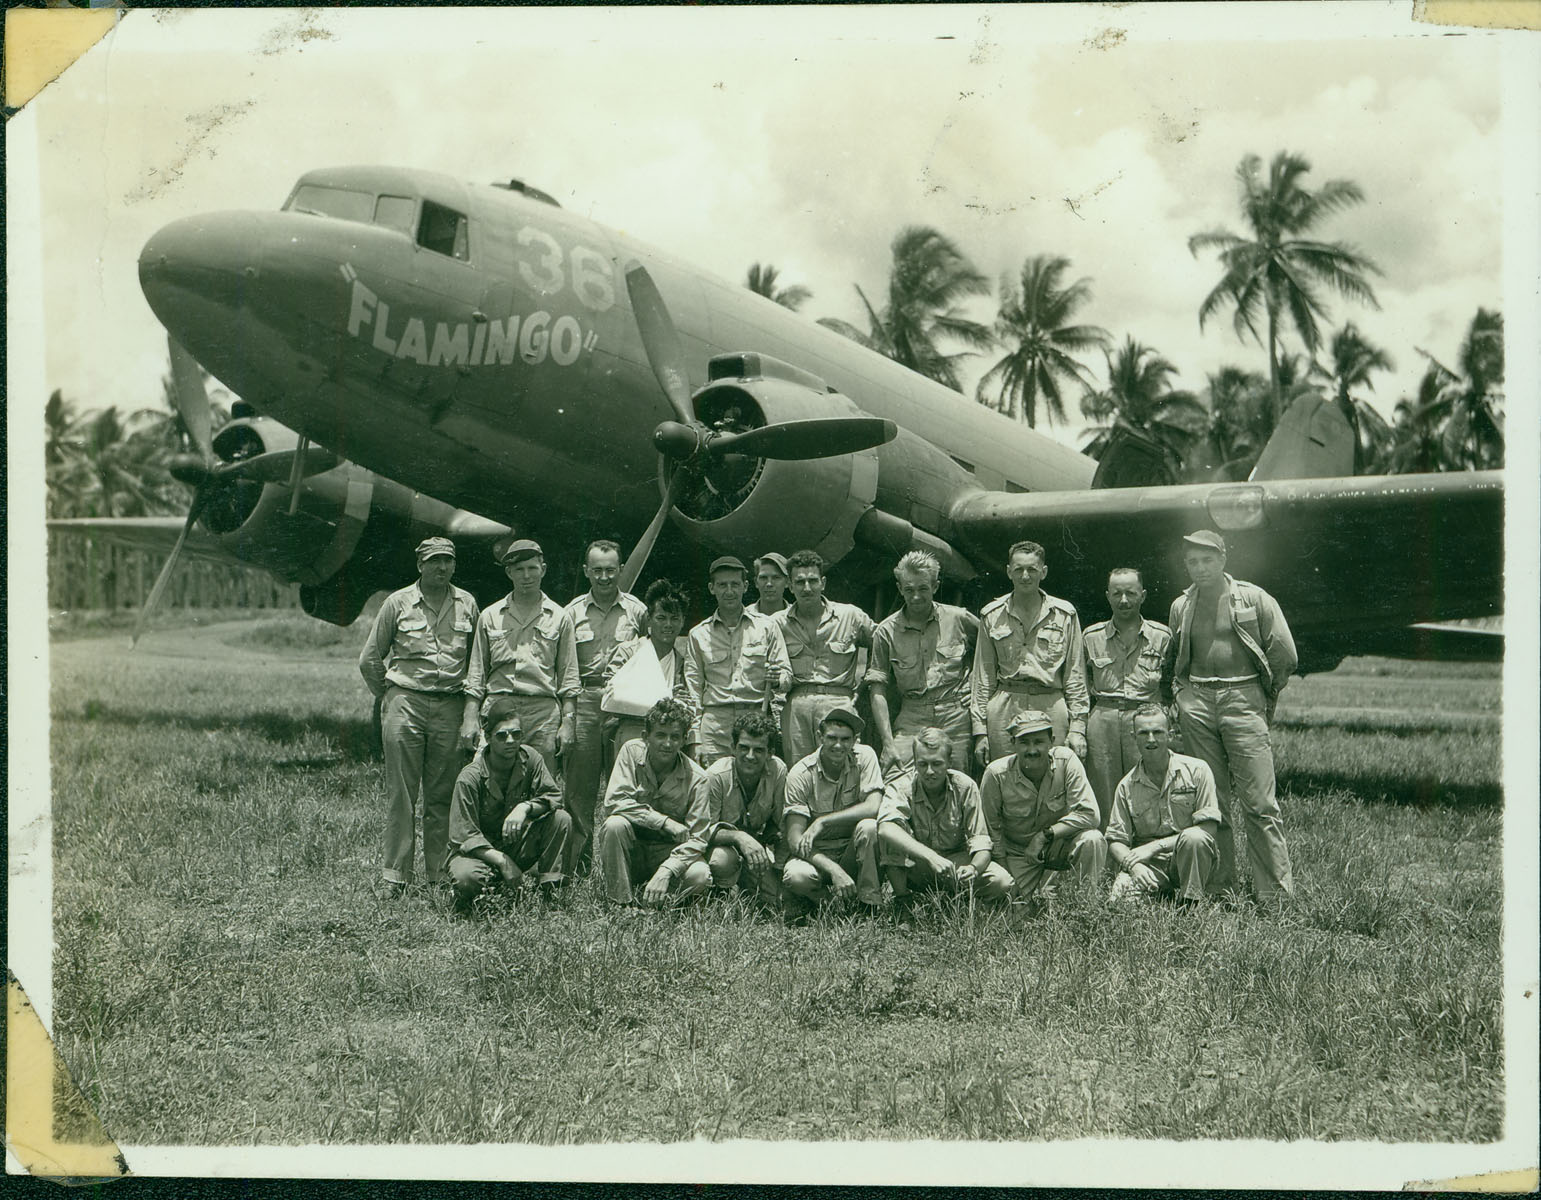 After landing, the rescue team and stranded officers pose in front of the rescue plane, the Flamingo.